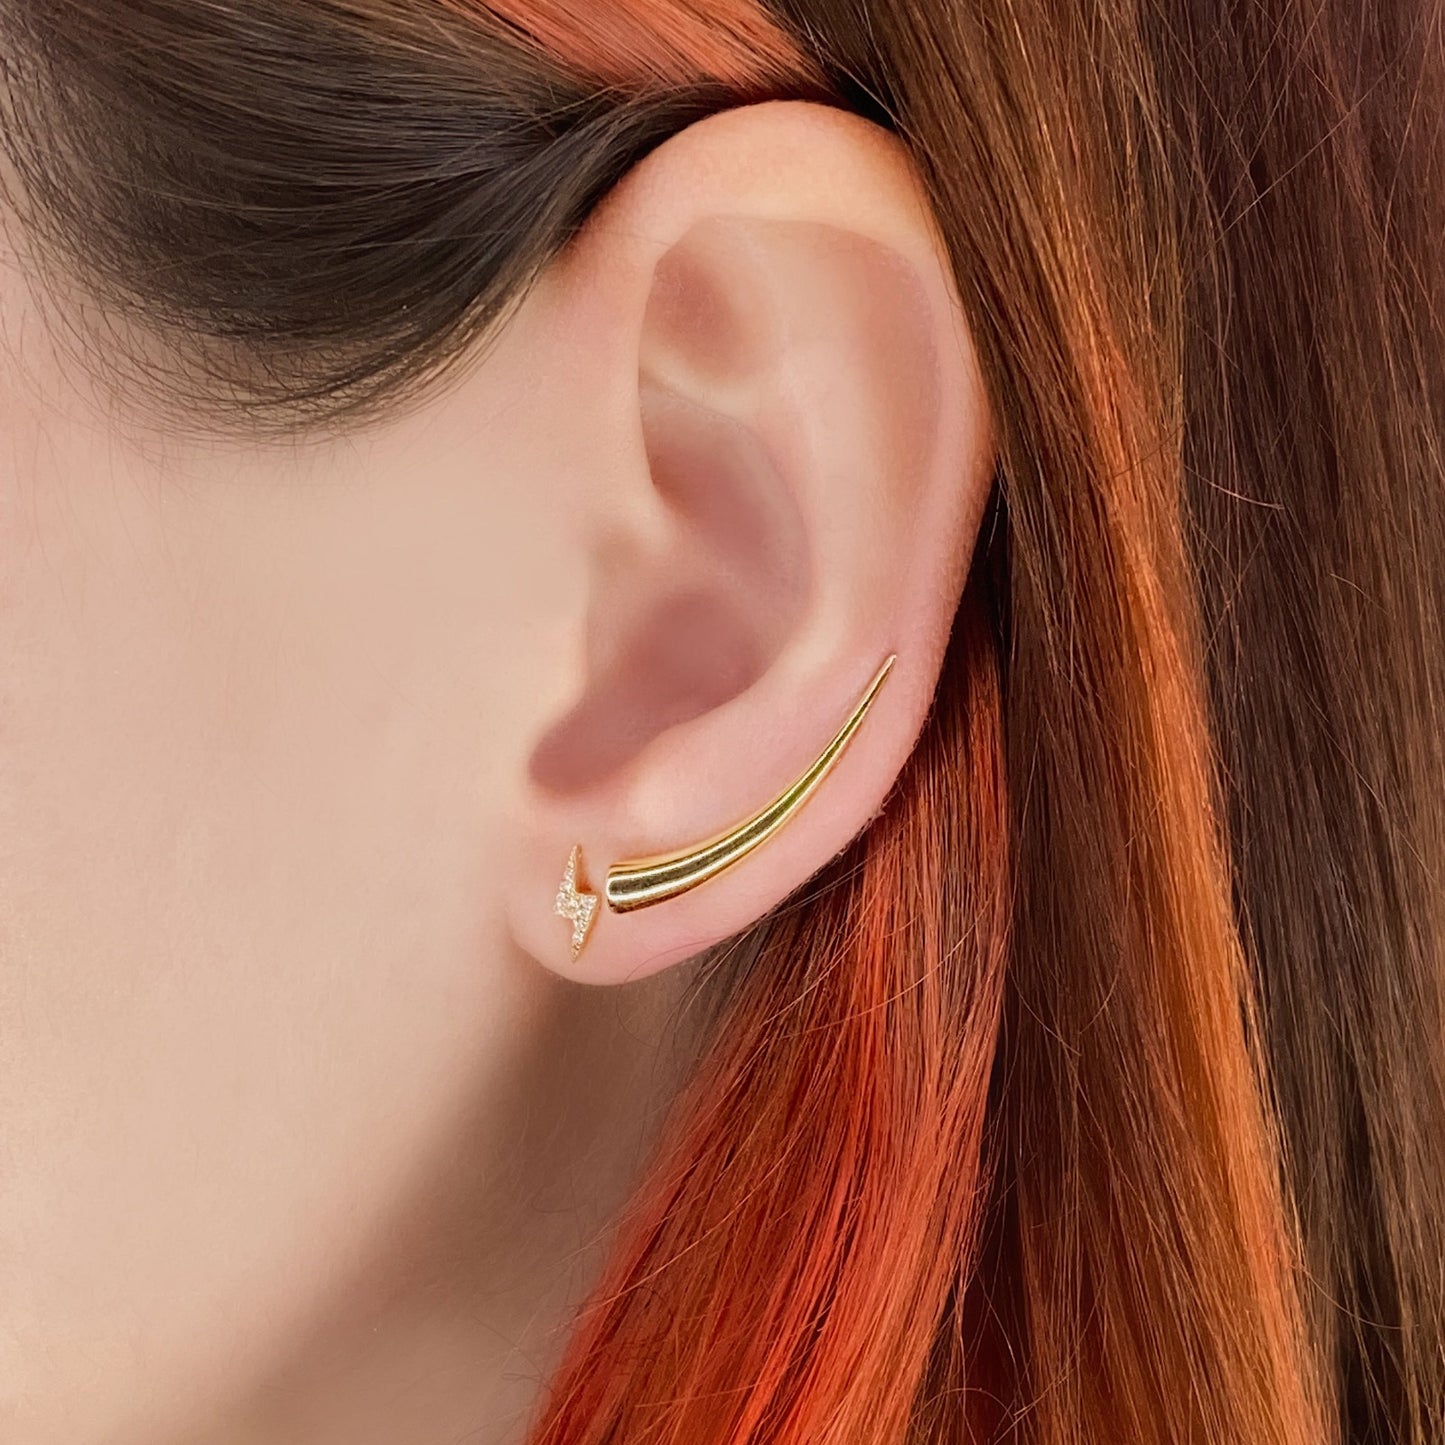 14k gold Curved Quill Climber Earrings styled on a ear